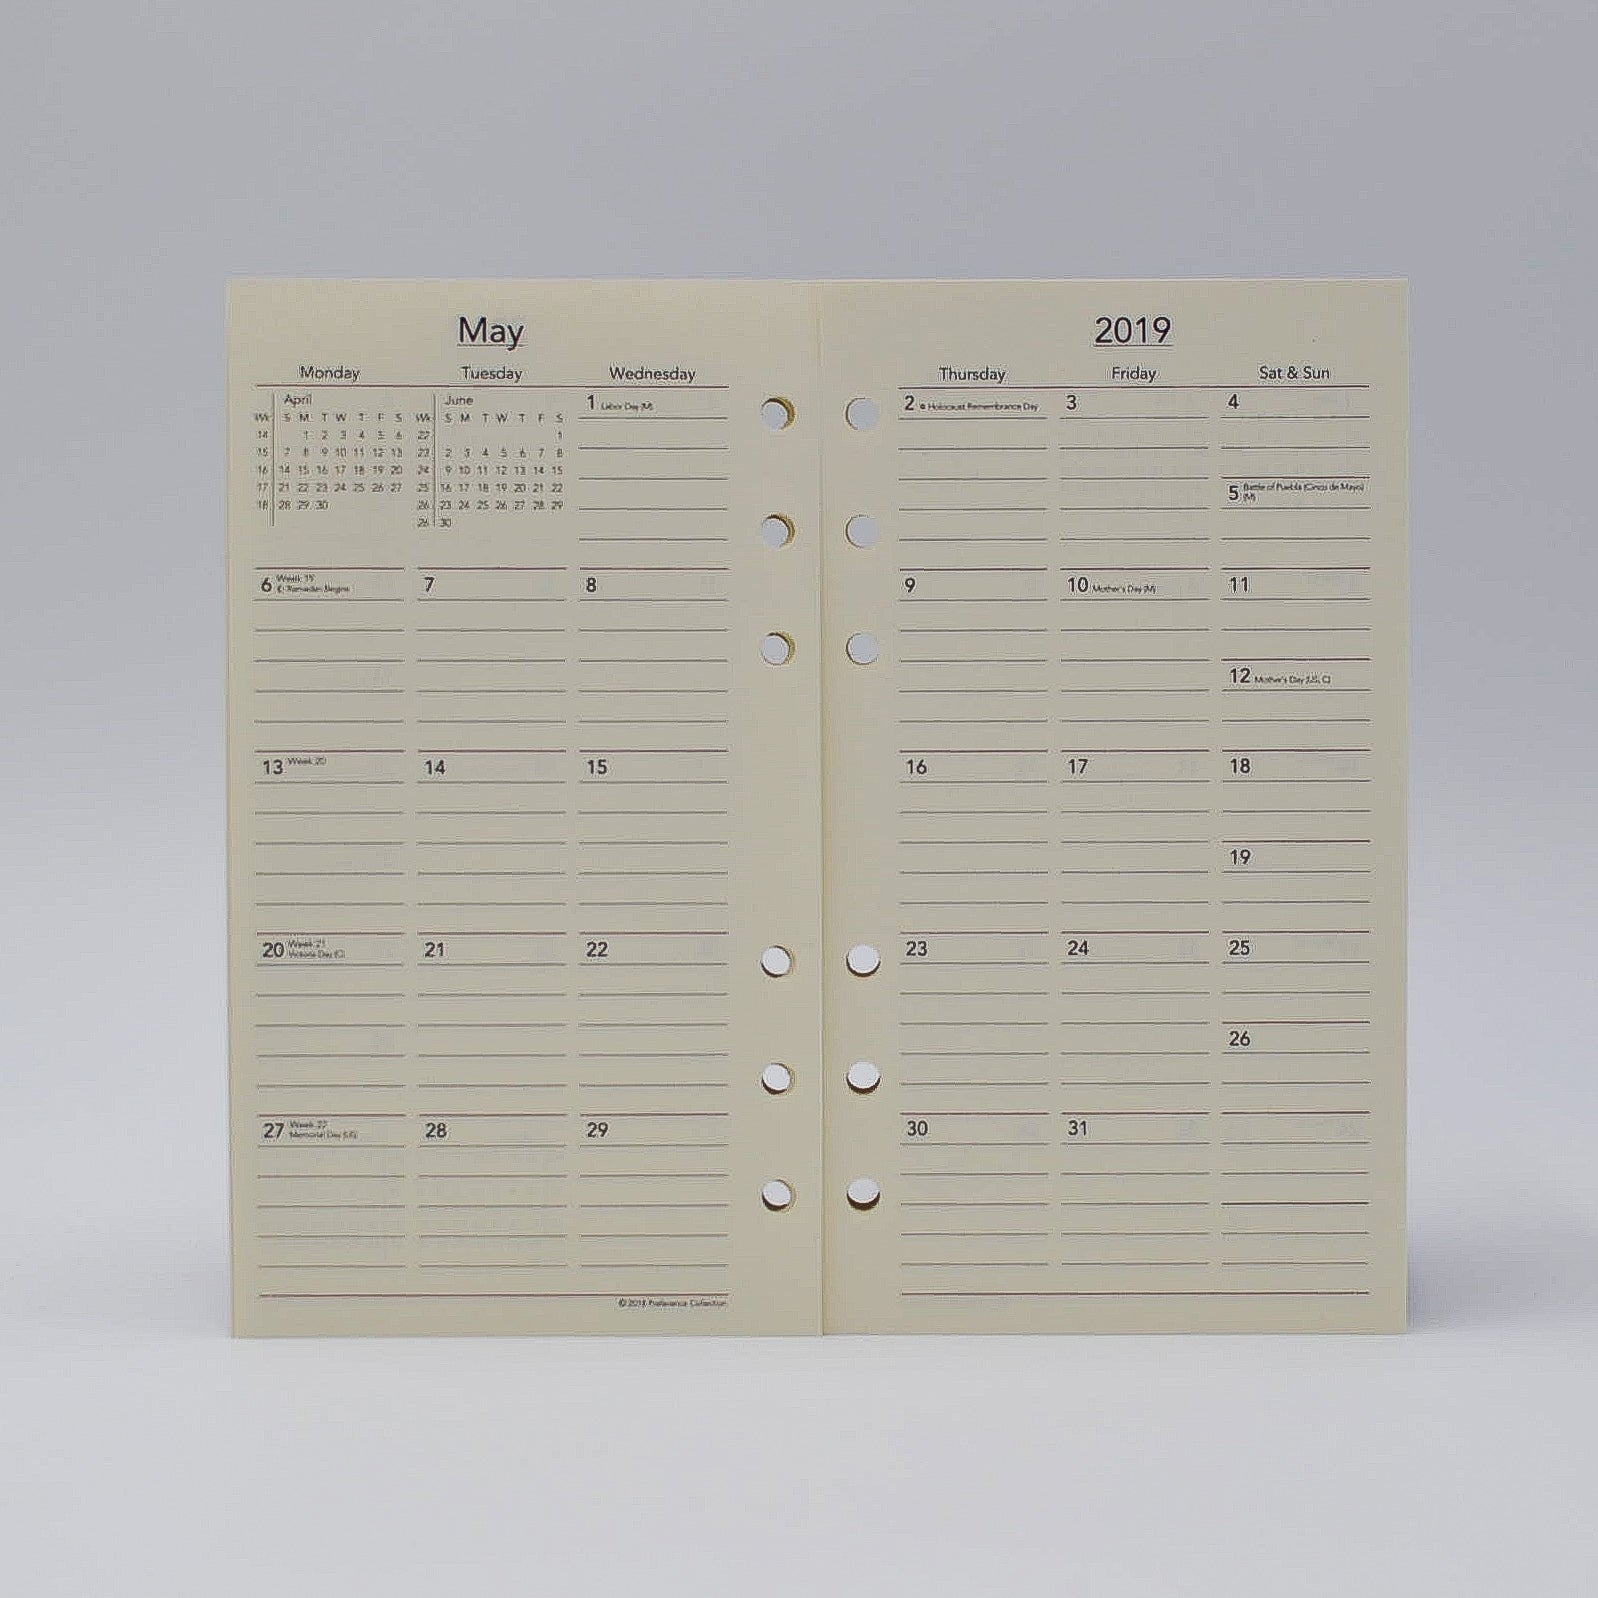 Preference Collection: PD646I 6-3/4x3-3/4 6-hole Planner monthly weekly calendar for 2019 or 2020 ivory loose leaf